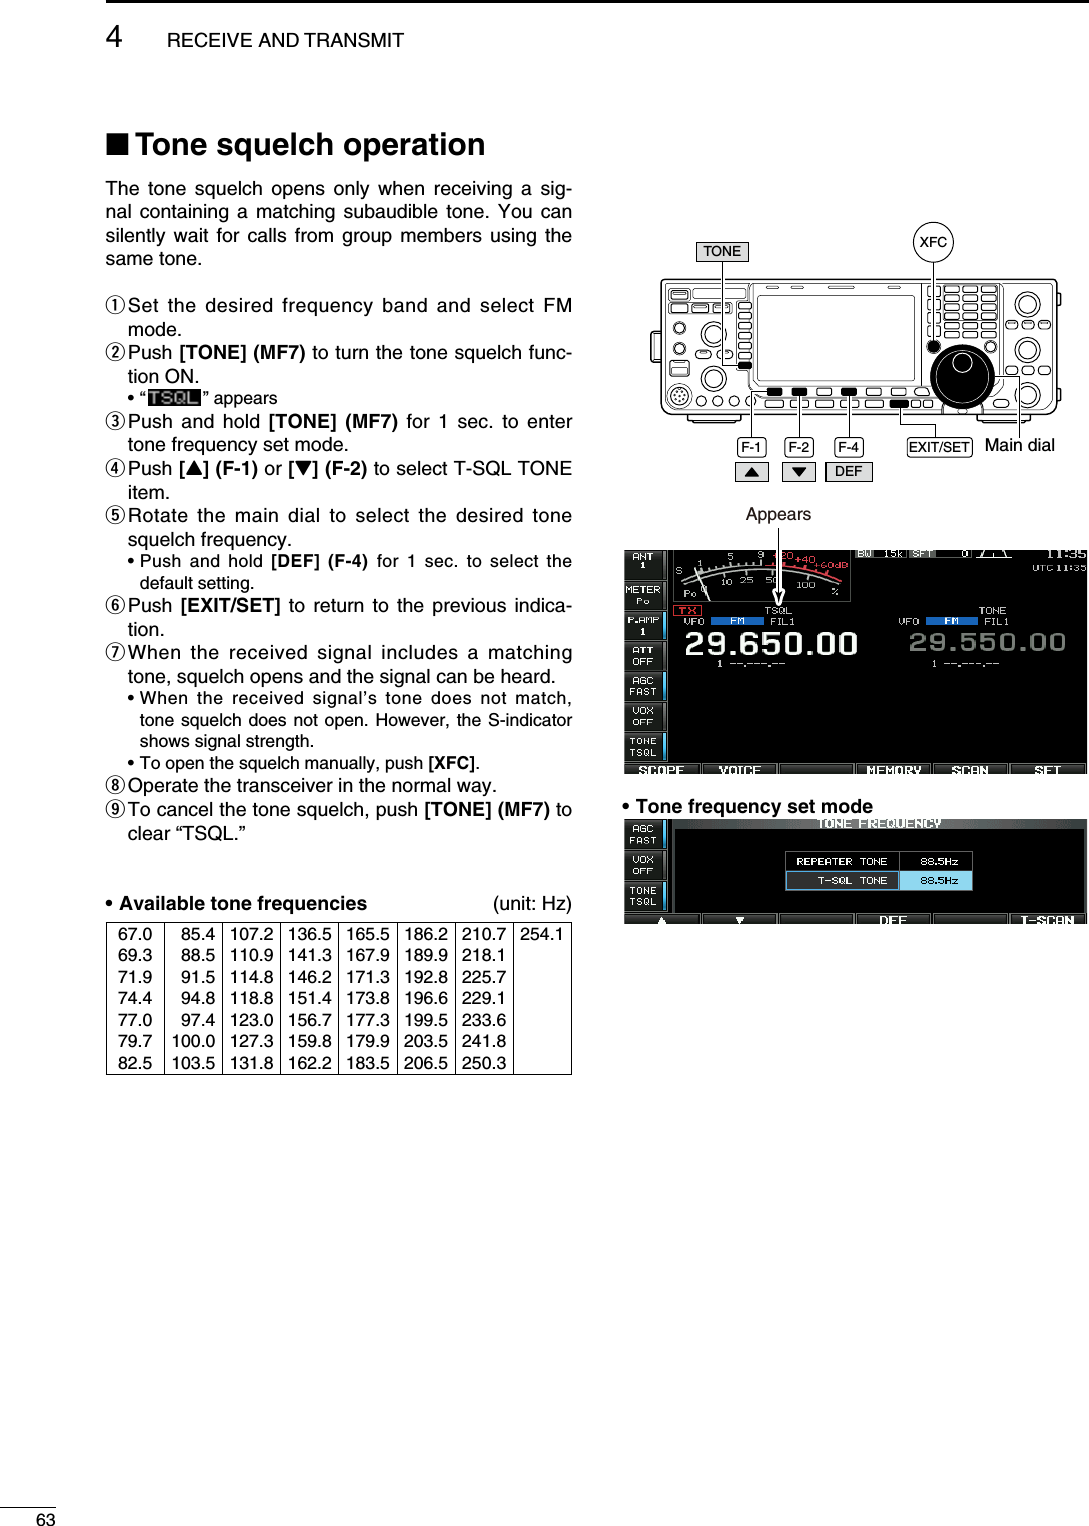 N Tone squelch operationThe tone squelch opens only when receiving a sig-nal containing a matching subaudible tone. You can silently wait for calls from group members using the same tone.q  Set the desired frequency band and select FM mode.w  Push [TONE] (MF7) to turn the tone squelch func-tion ON. • “   ” appearse  Push and hold [TONE] (MF7) for 1 sec. to enter tone frequency set mode.r  Push [Y] (F-1) or [Z] (F-2) to select T-SQL TONE item.t  Rotate the main dial to select the desired tone squelch frequency. •  Push and hold [DEF] (F-4) for 1 sec. to select the default setting.y  Push  [EXIT/SET] to return to the previous indica-tion.u  When the received signal includes a matching tone, squelch opens and the signal can be heard. •  When the received signal’s tone does not match, tone squelch does not open. However, the S-indicator shows signal strength. •  To open the squelch manually, push [XFC].i  Operate the transceiver in the normal way.o  To cancel the tone squelch, push [TONE] (MF7) to clear “TSQL.”• Available tone frequencies (unit: Hz)67.069.371.974.477.079.782.5085.4088.5091.5094.8097.4100.0103.5107.2110.9114.8118.8123.0127.3131.8136.5141.3146.2151.4156.7159.8162.2165.5167.9171.3173.8177.3179.9183.5186.2189.9192.8196.6199.5203.5206.5210.7218.1225.7229.1233.6241.8250.3254.1F-4 EXIT/SET Main dialF-2F-1DEFTONE XFCAppears• Tone frequency set mode634RECEIVE AND TRANSMIT